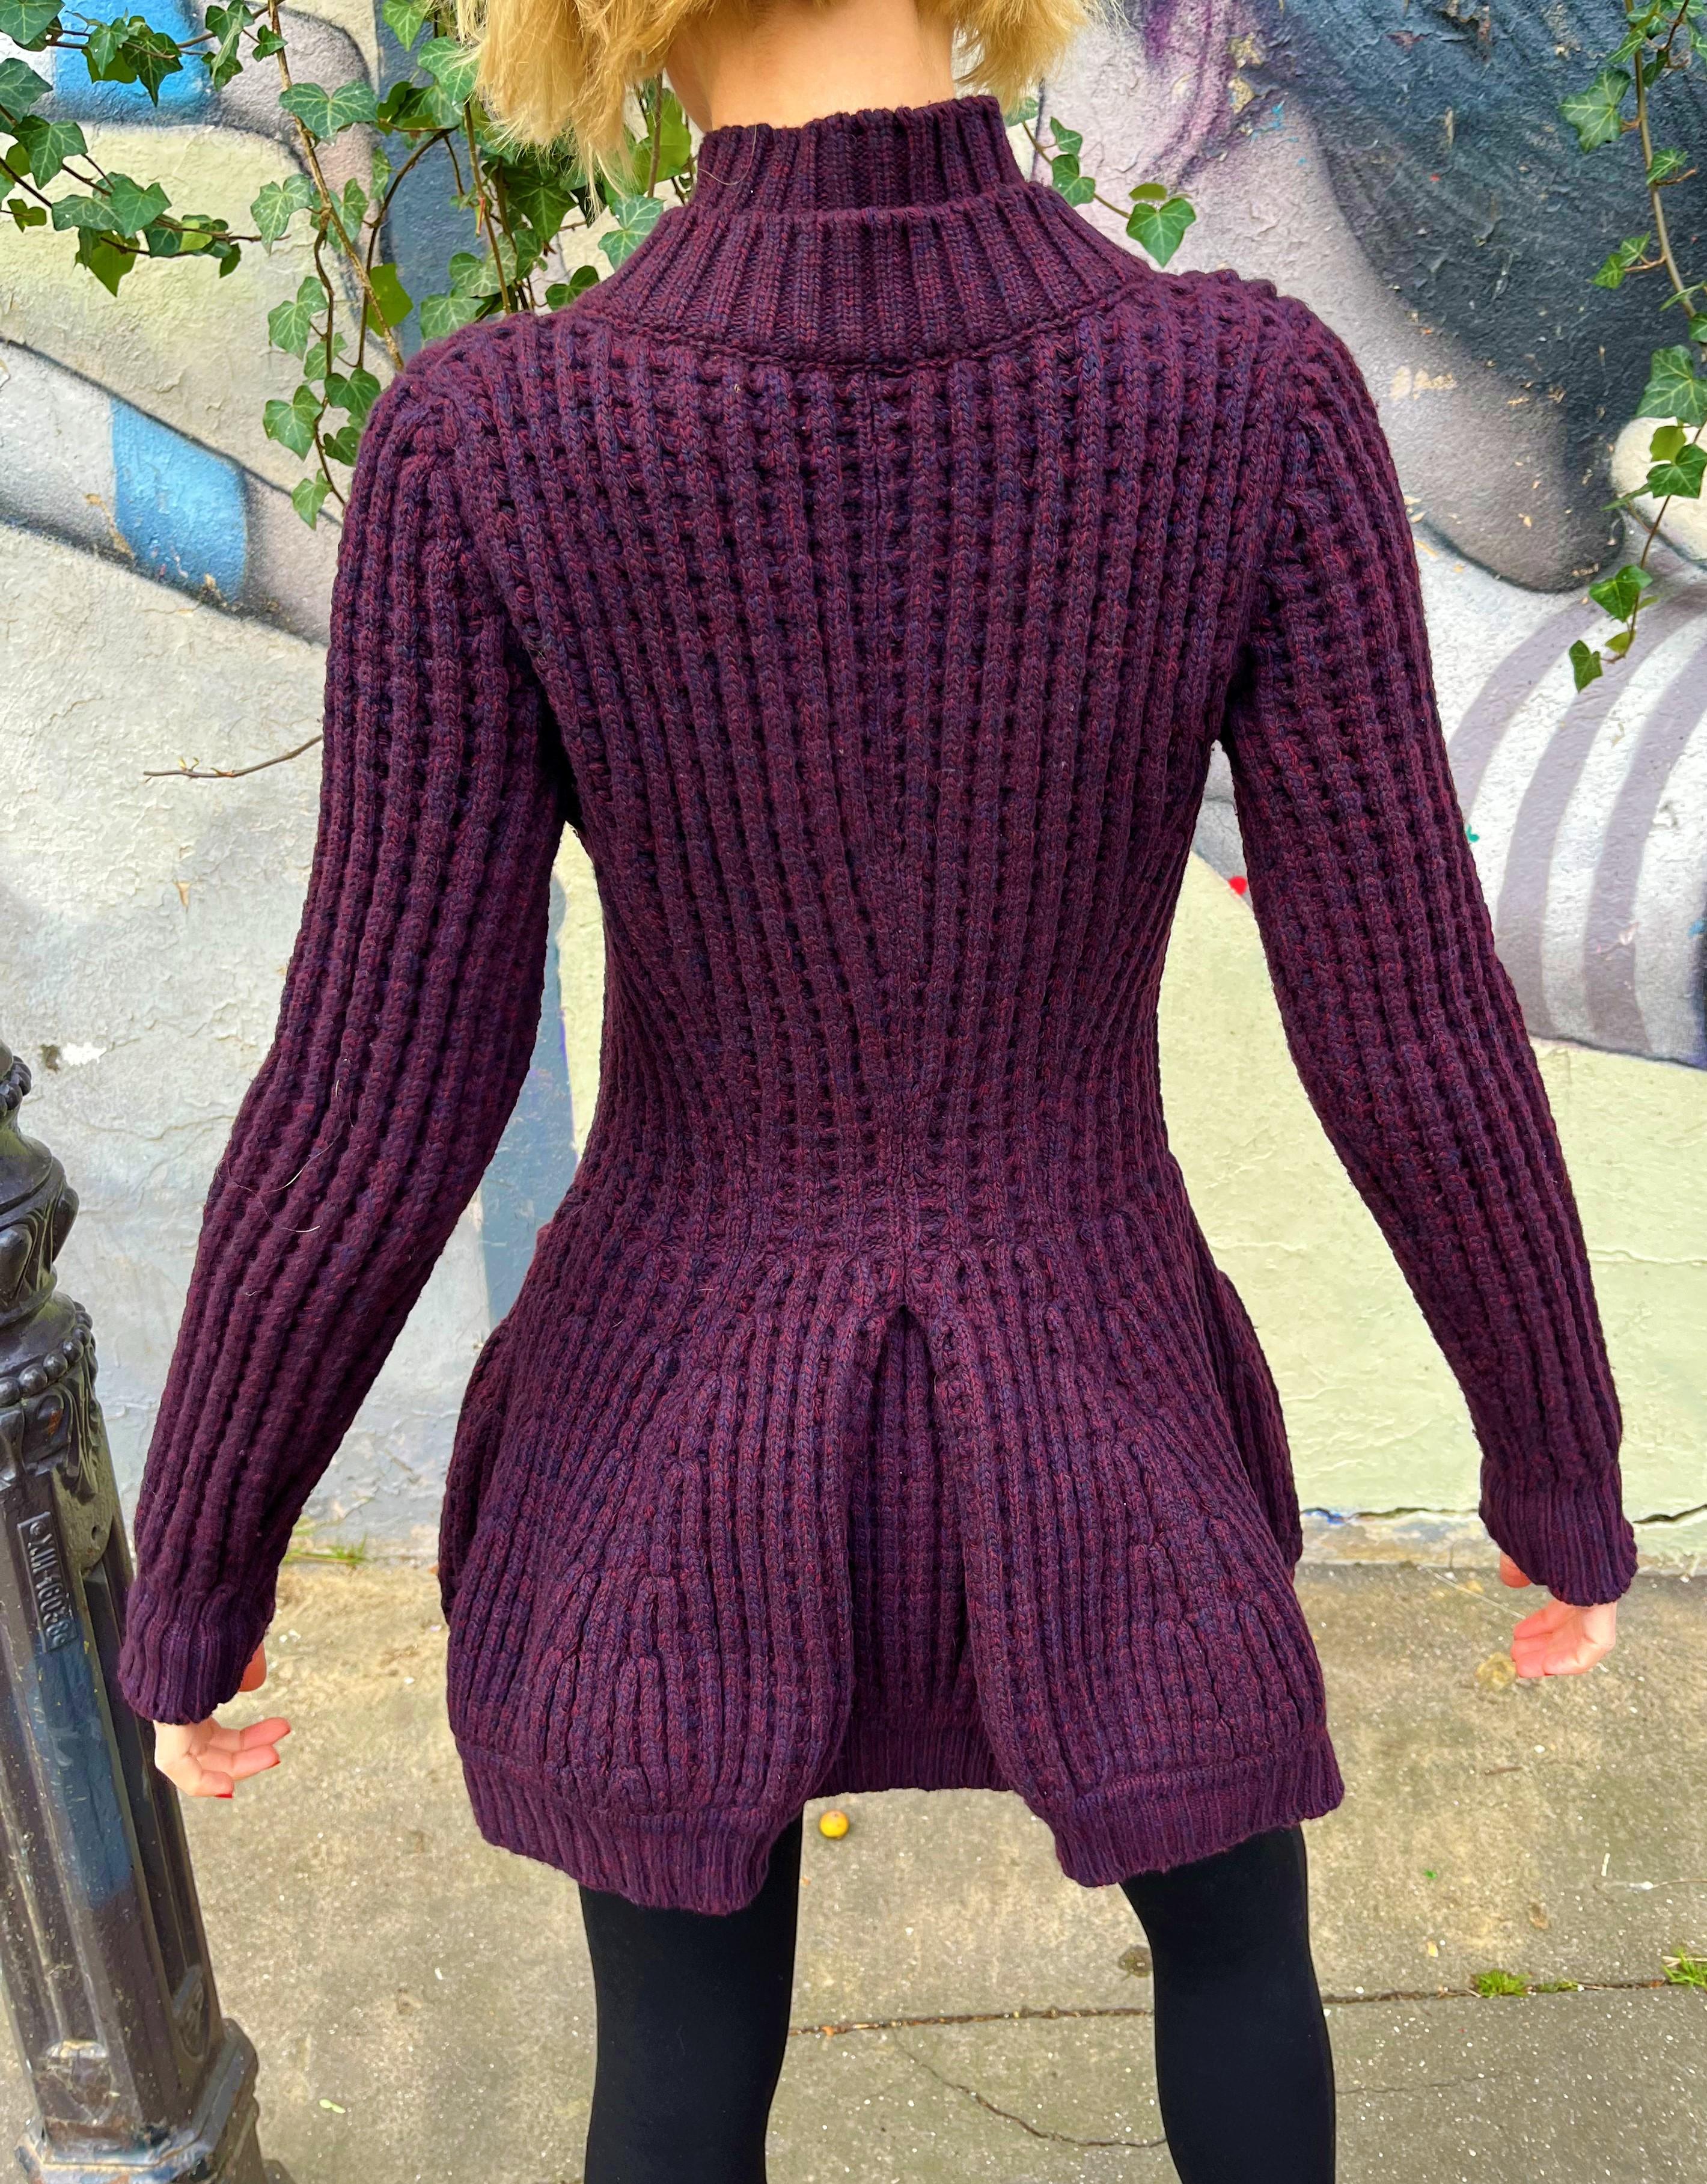 Alexander McQueen Cable Knit Knitted Structure Wool Pullover Sweater Coat Dress In Excellent Condition For Sale In PARIS, FR